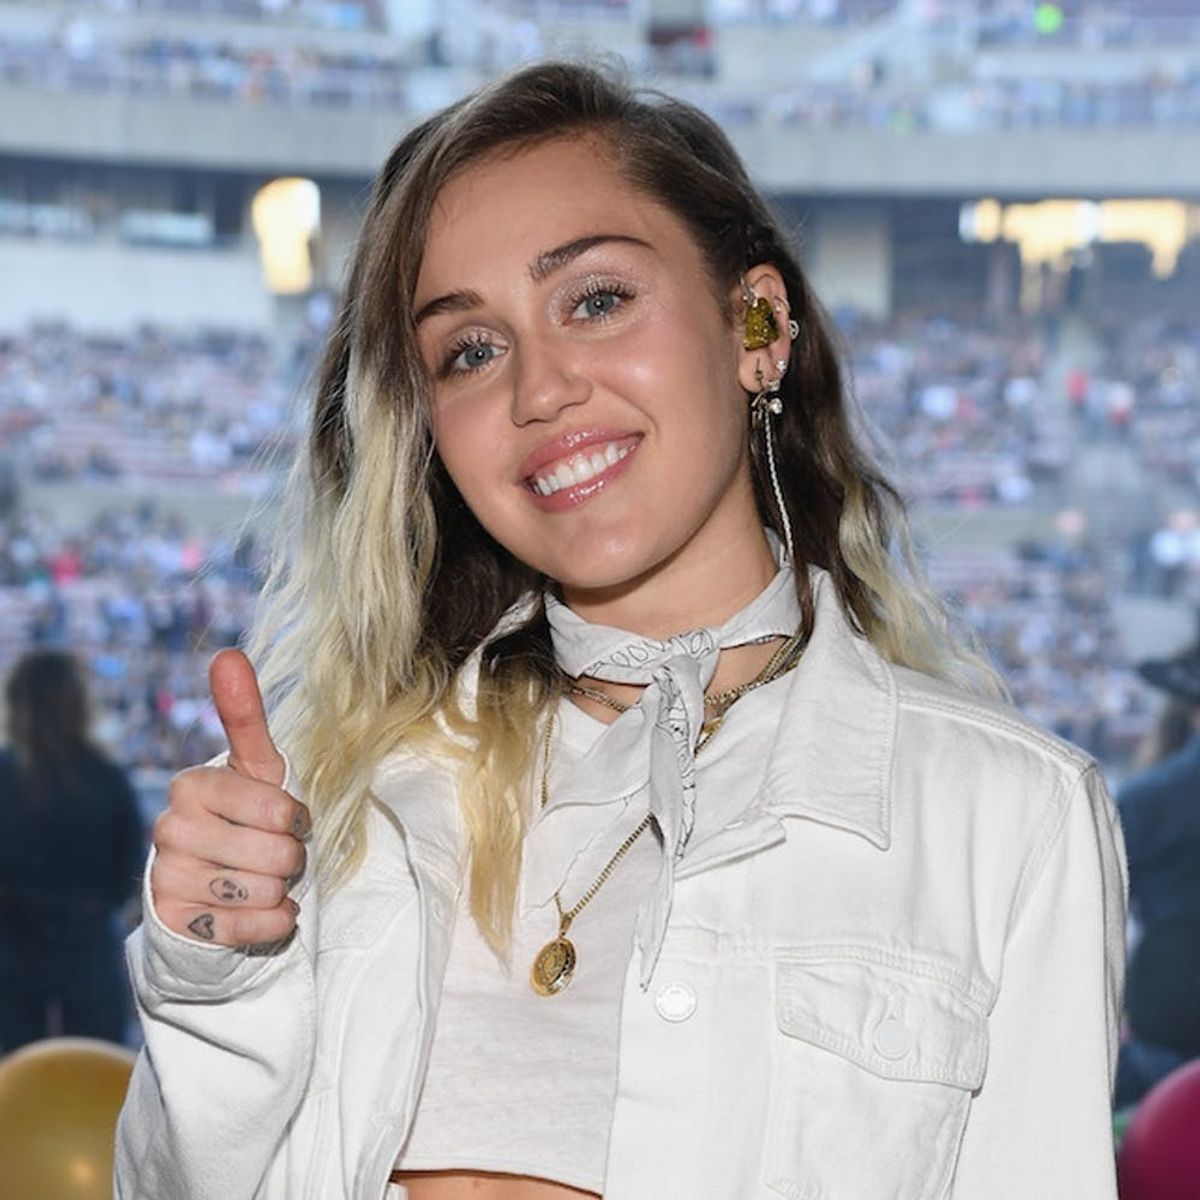 Morning Buzz! Miley Cyrus Got a New Tattoo and It Has a Special Meaning + More